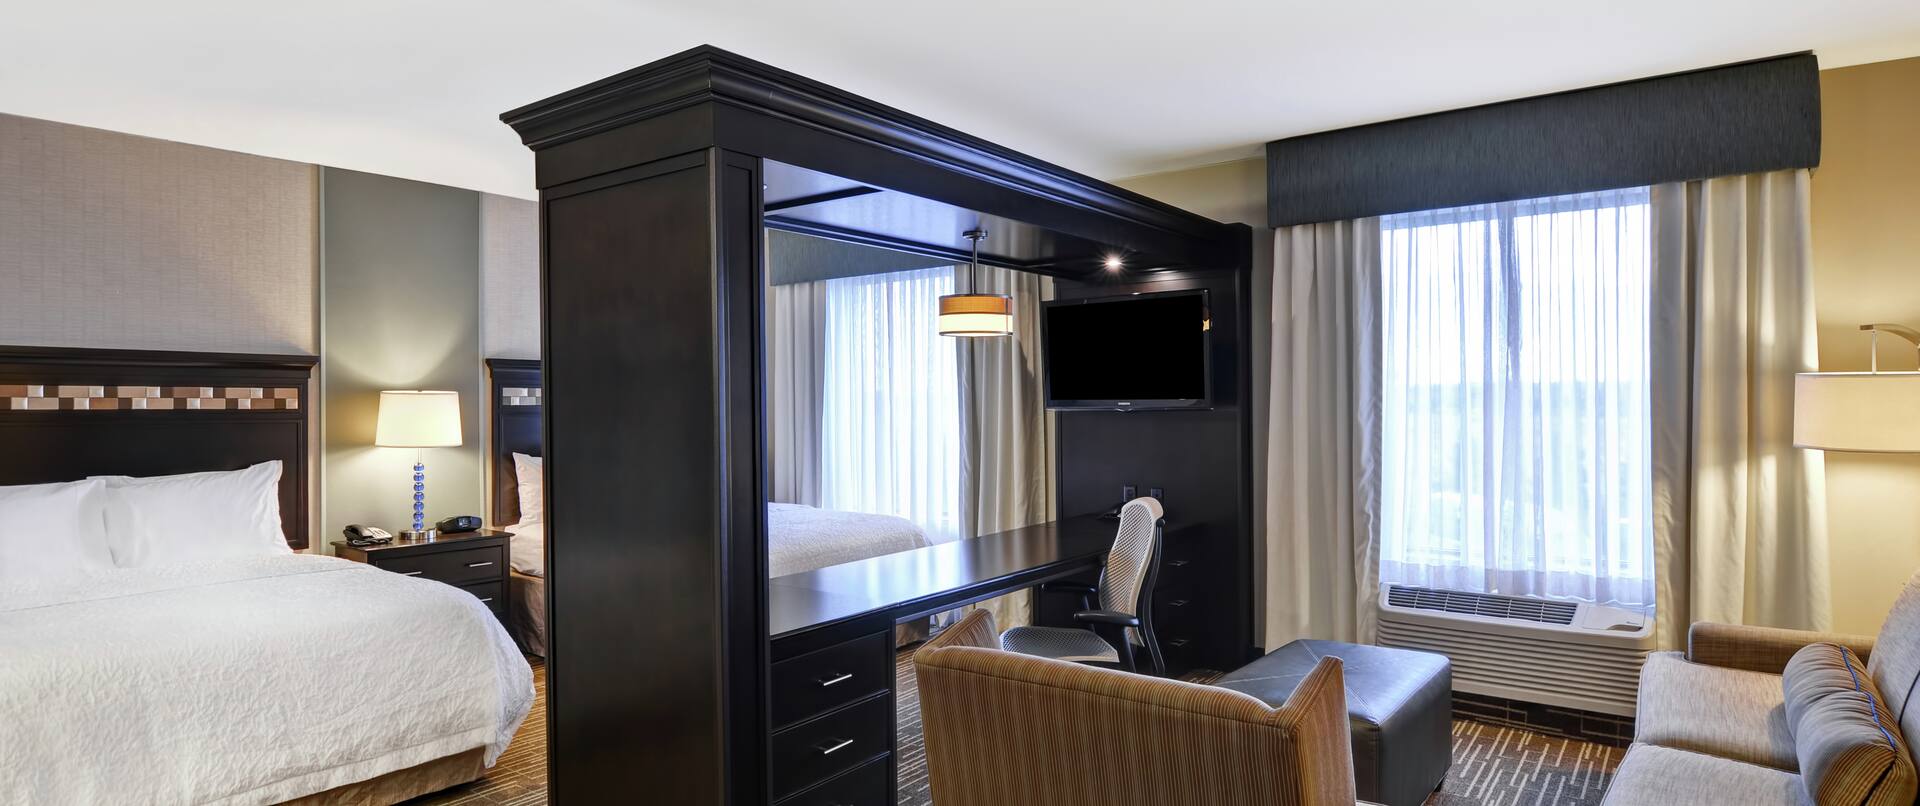 Guestroom Suite with Double Beds, Lounge Area, Room Technology, and Work Desk